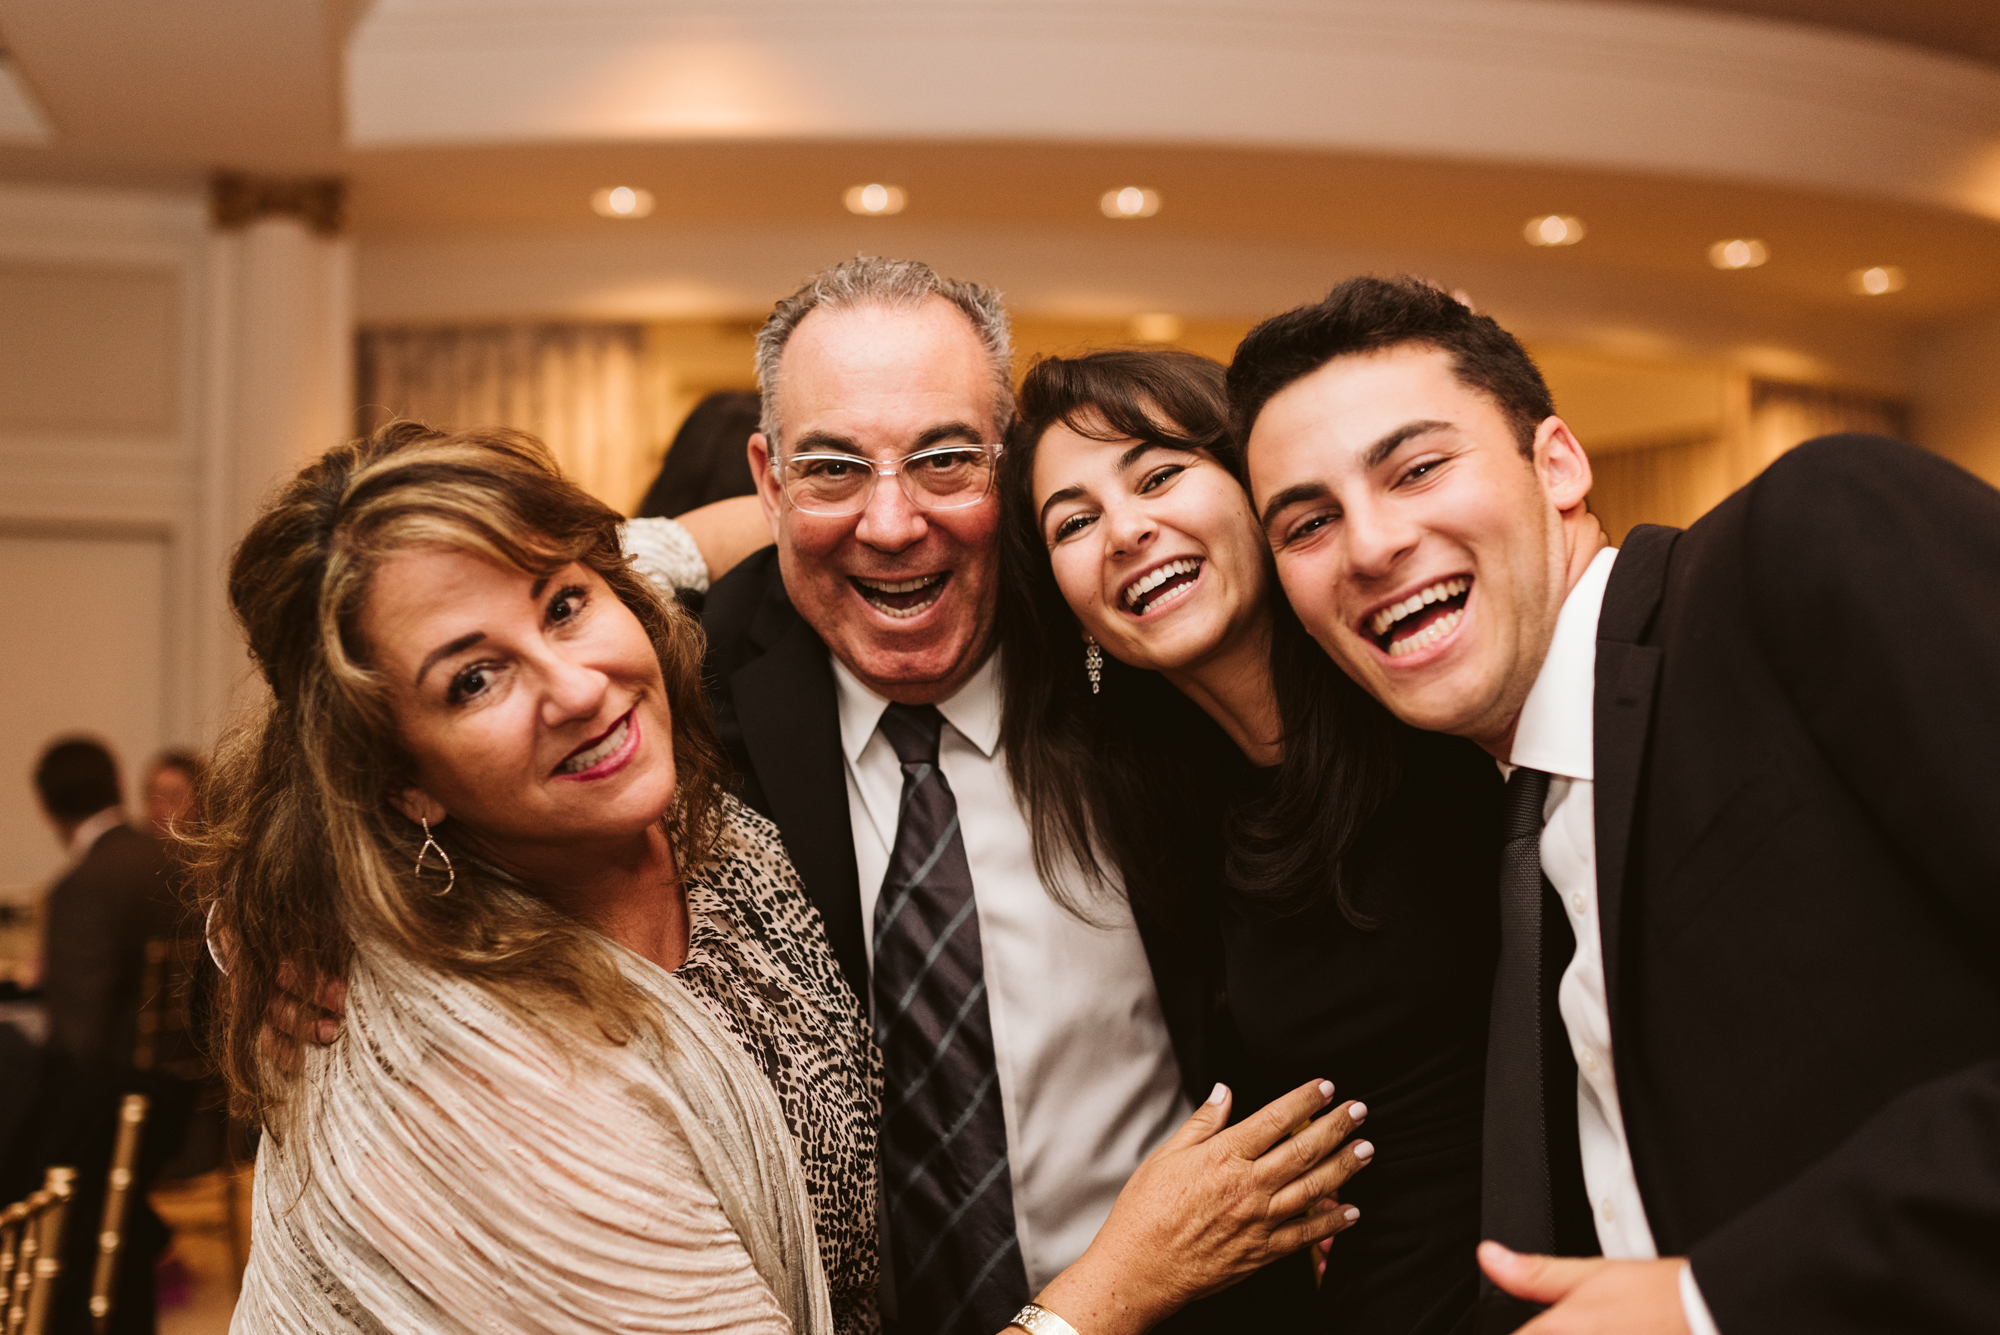 Elegant, Columbia Country Club, Chevy Chase Maryland, Baltimore Wedding Photographer, Classic, Traditional, Family Photo at Wedding Reception, Dance Floor